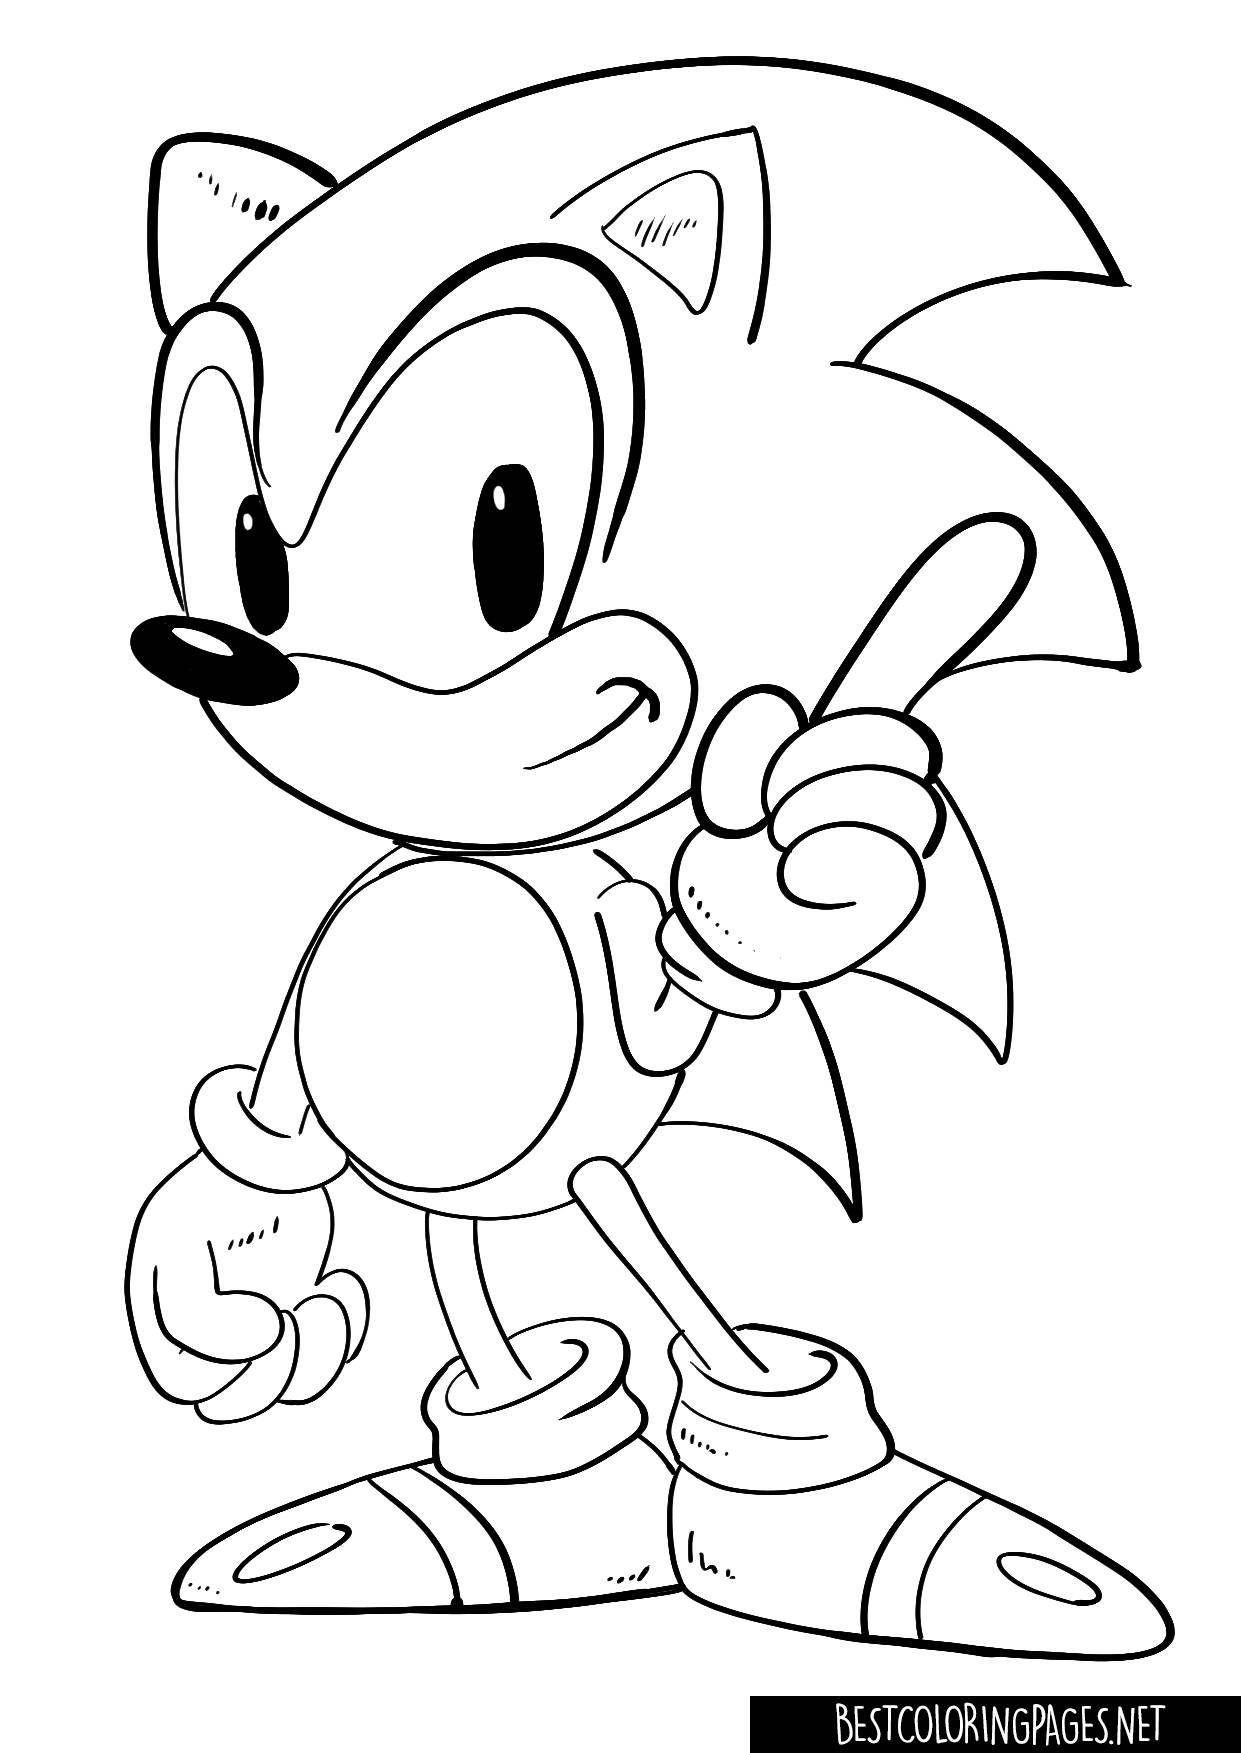 Sonic Coloring Pages - Free Printable Coloring Pages - BestColoringPages.net